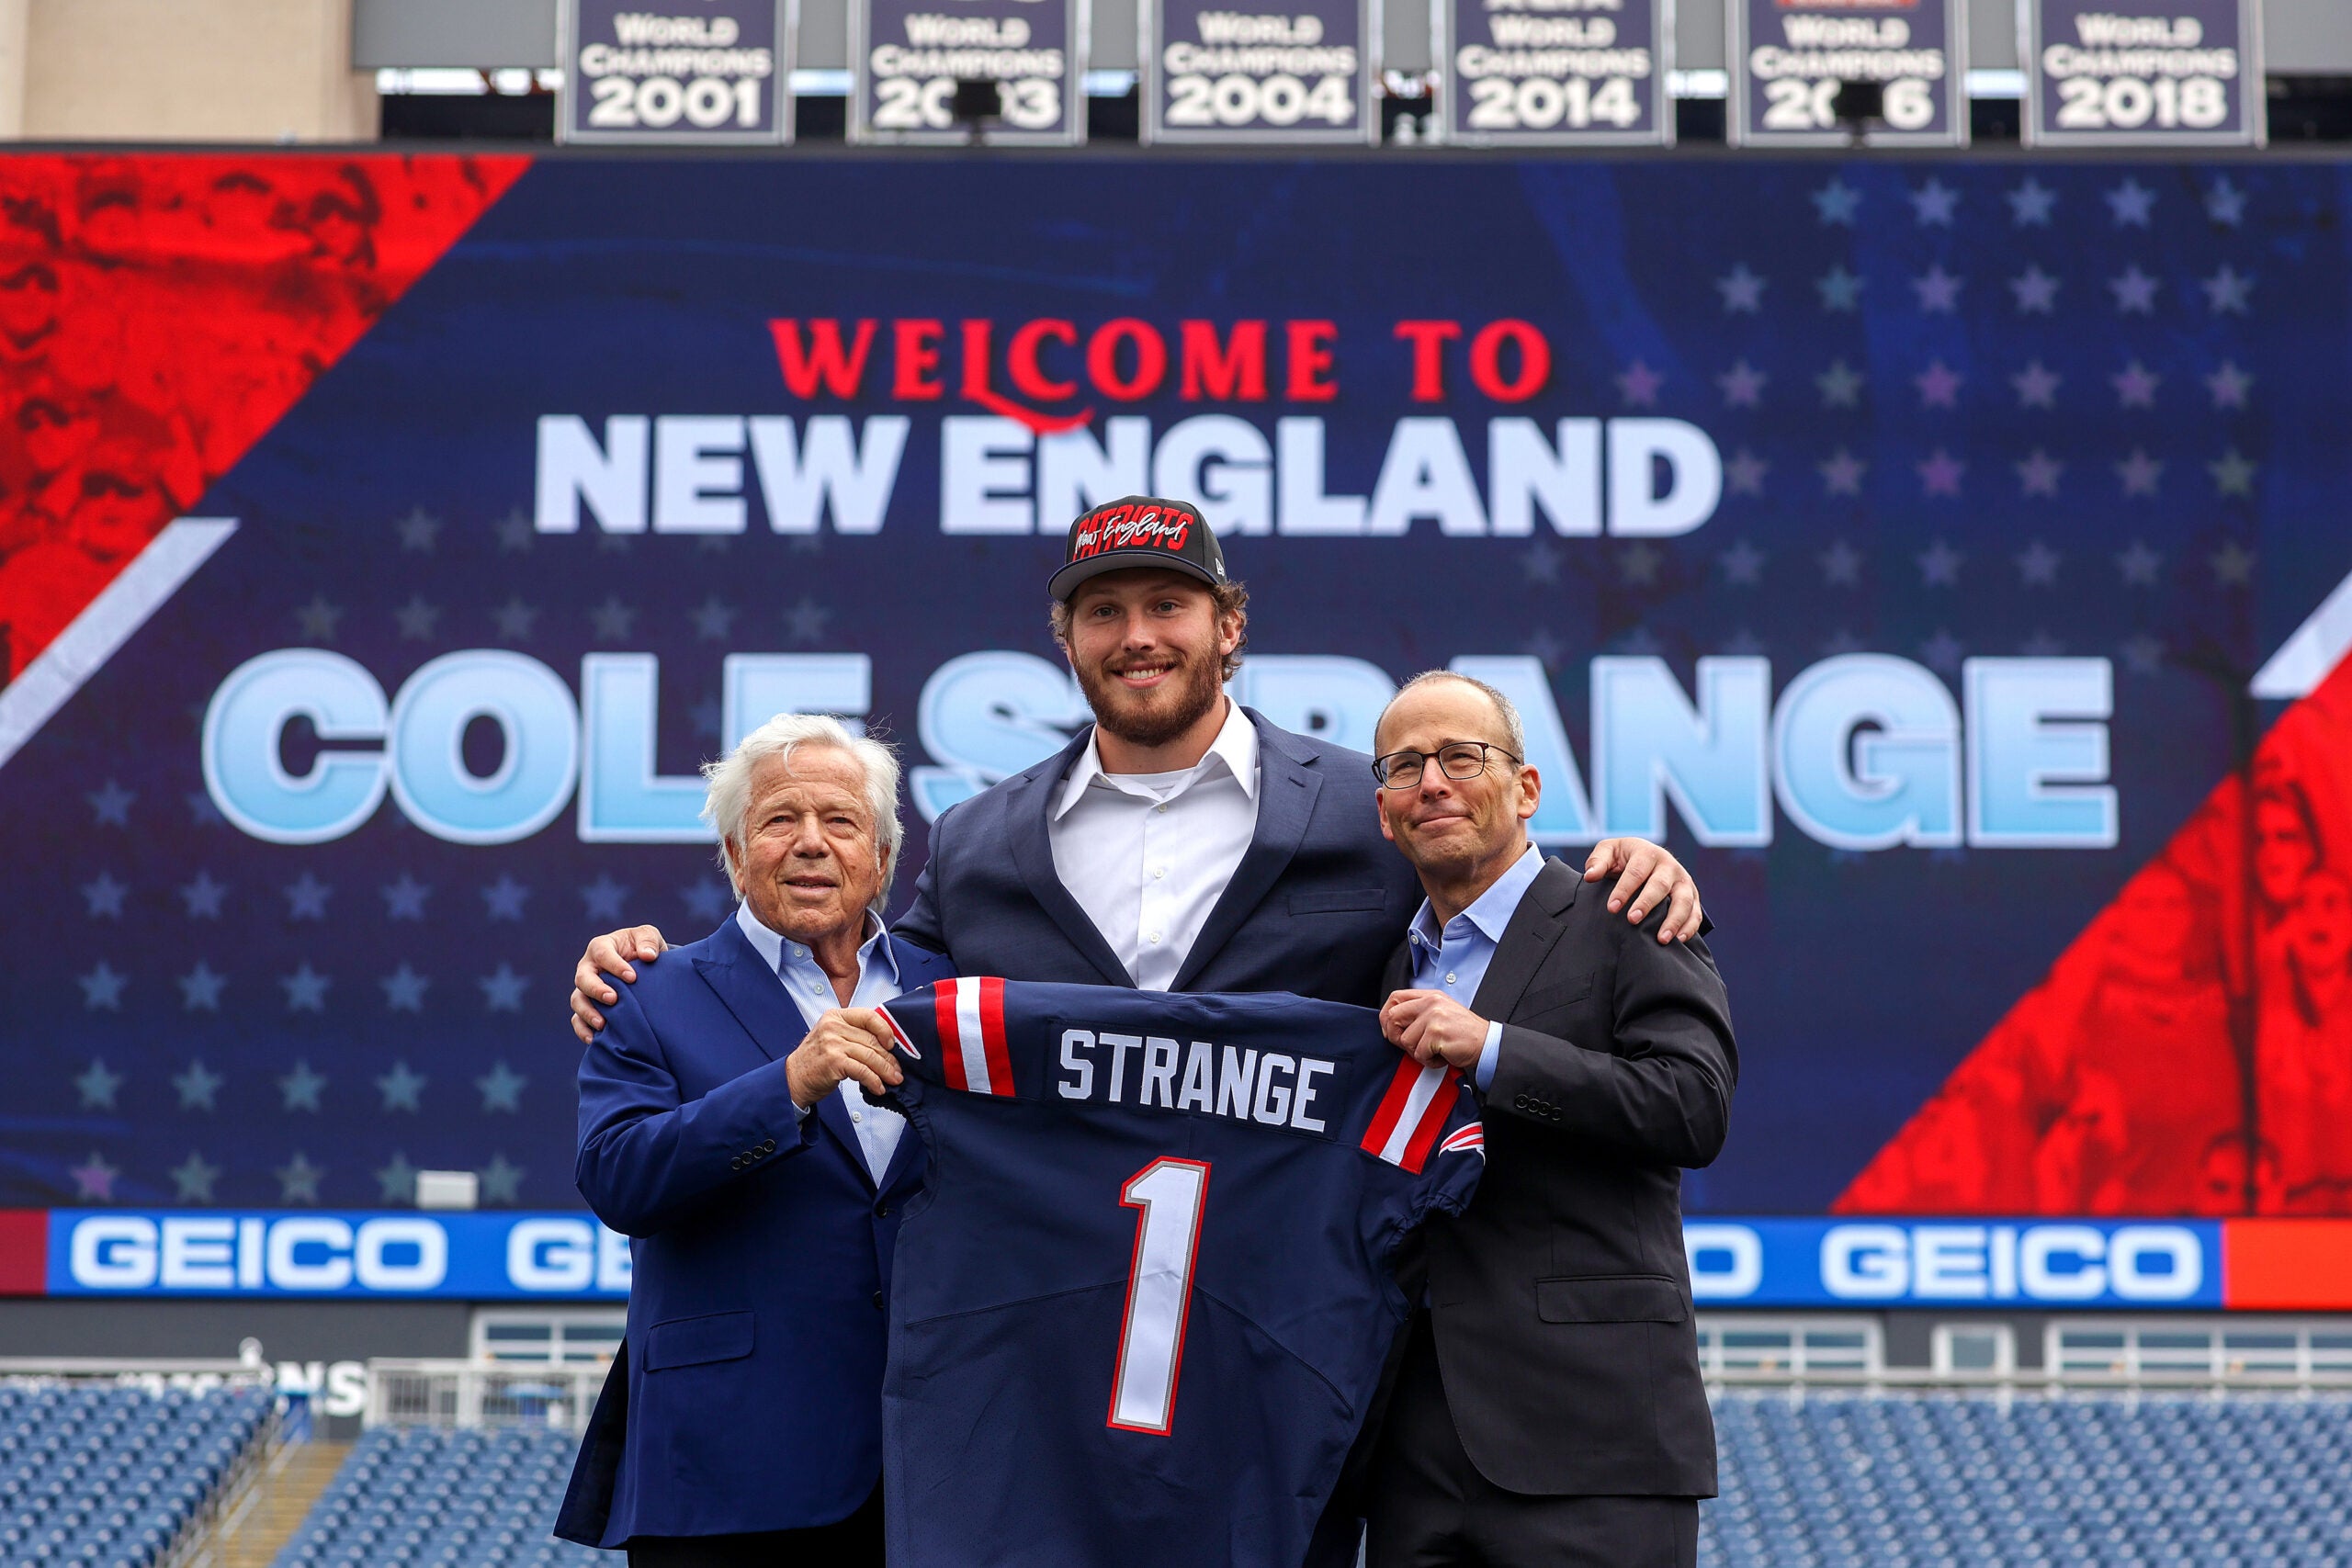 Cole Strange is the most recent first round pick made by Bill Belichick and the Patriots. He stands alongside Robert and Jonathan Kraft at Gillette Stadium.